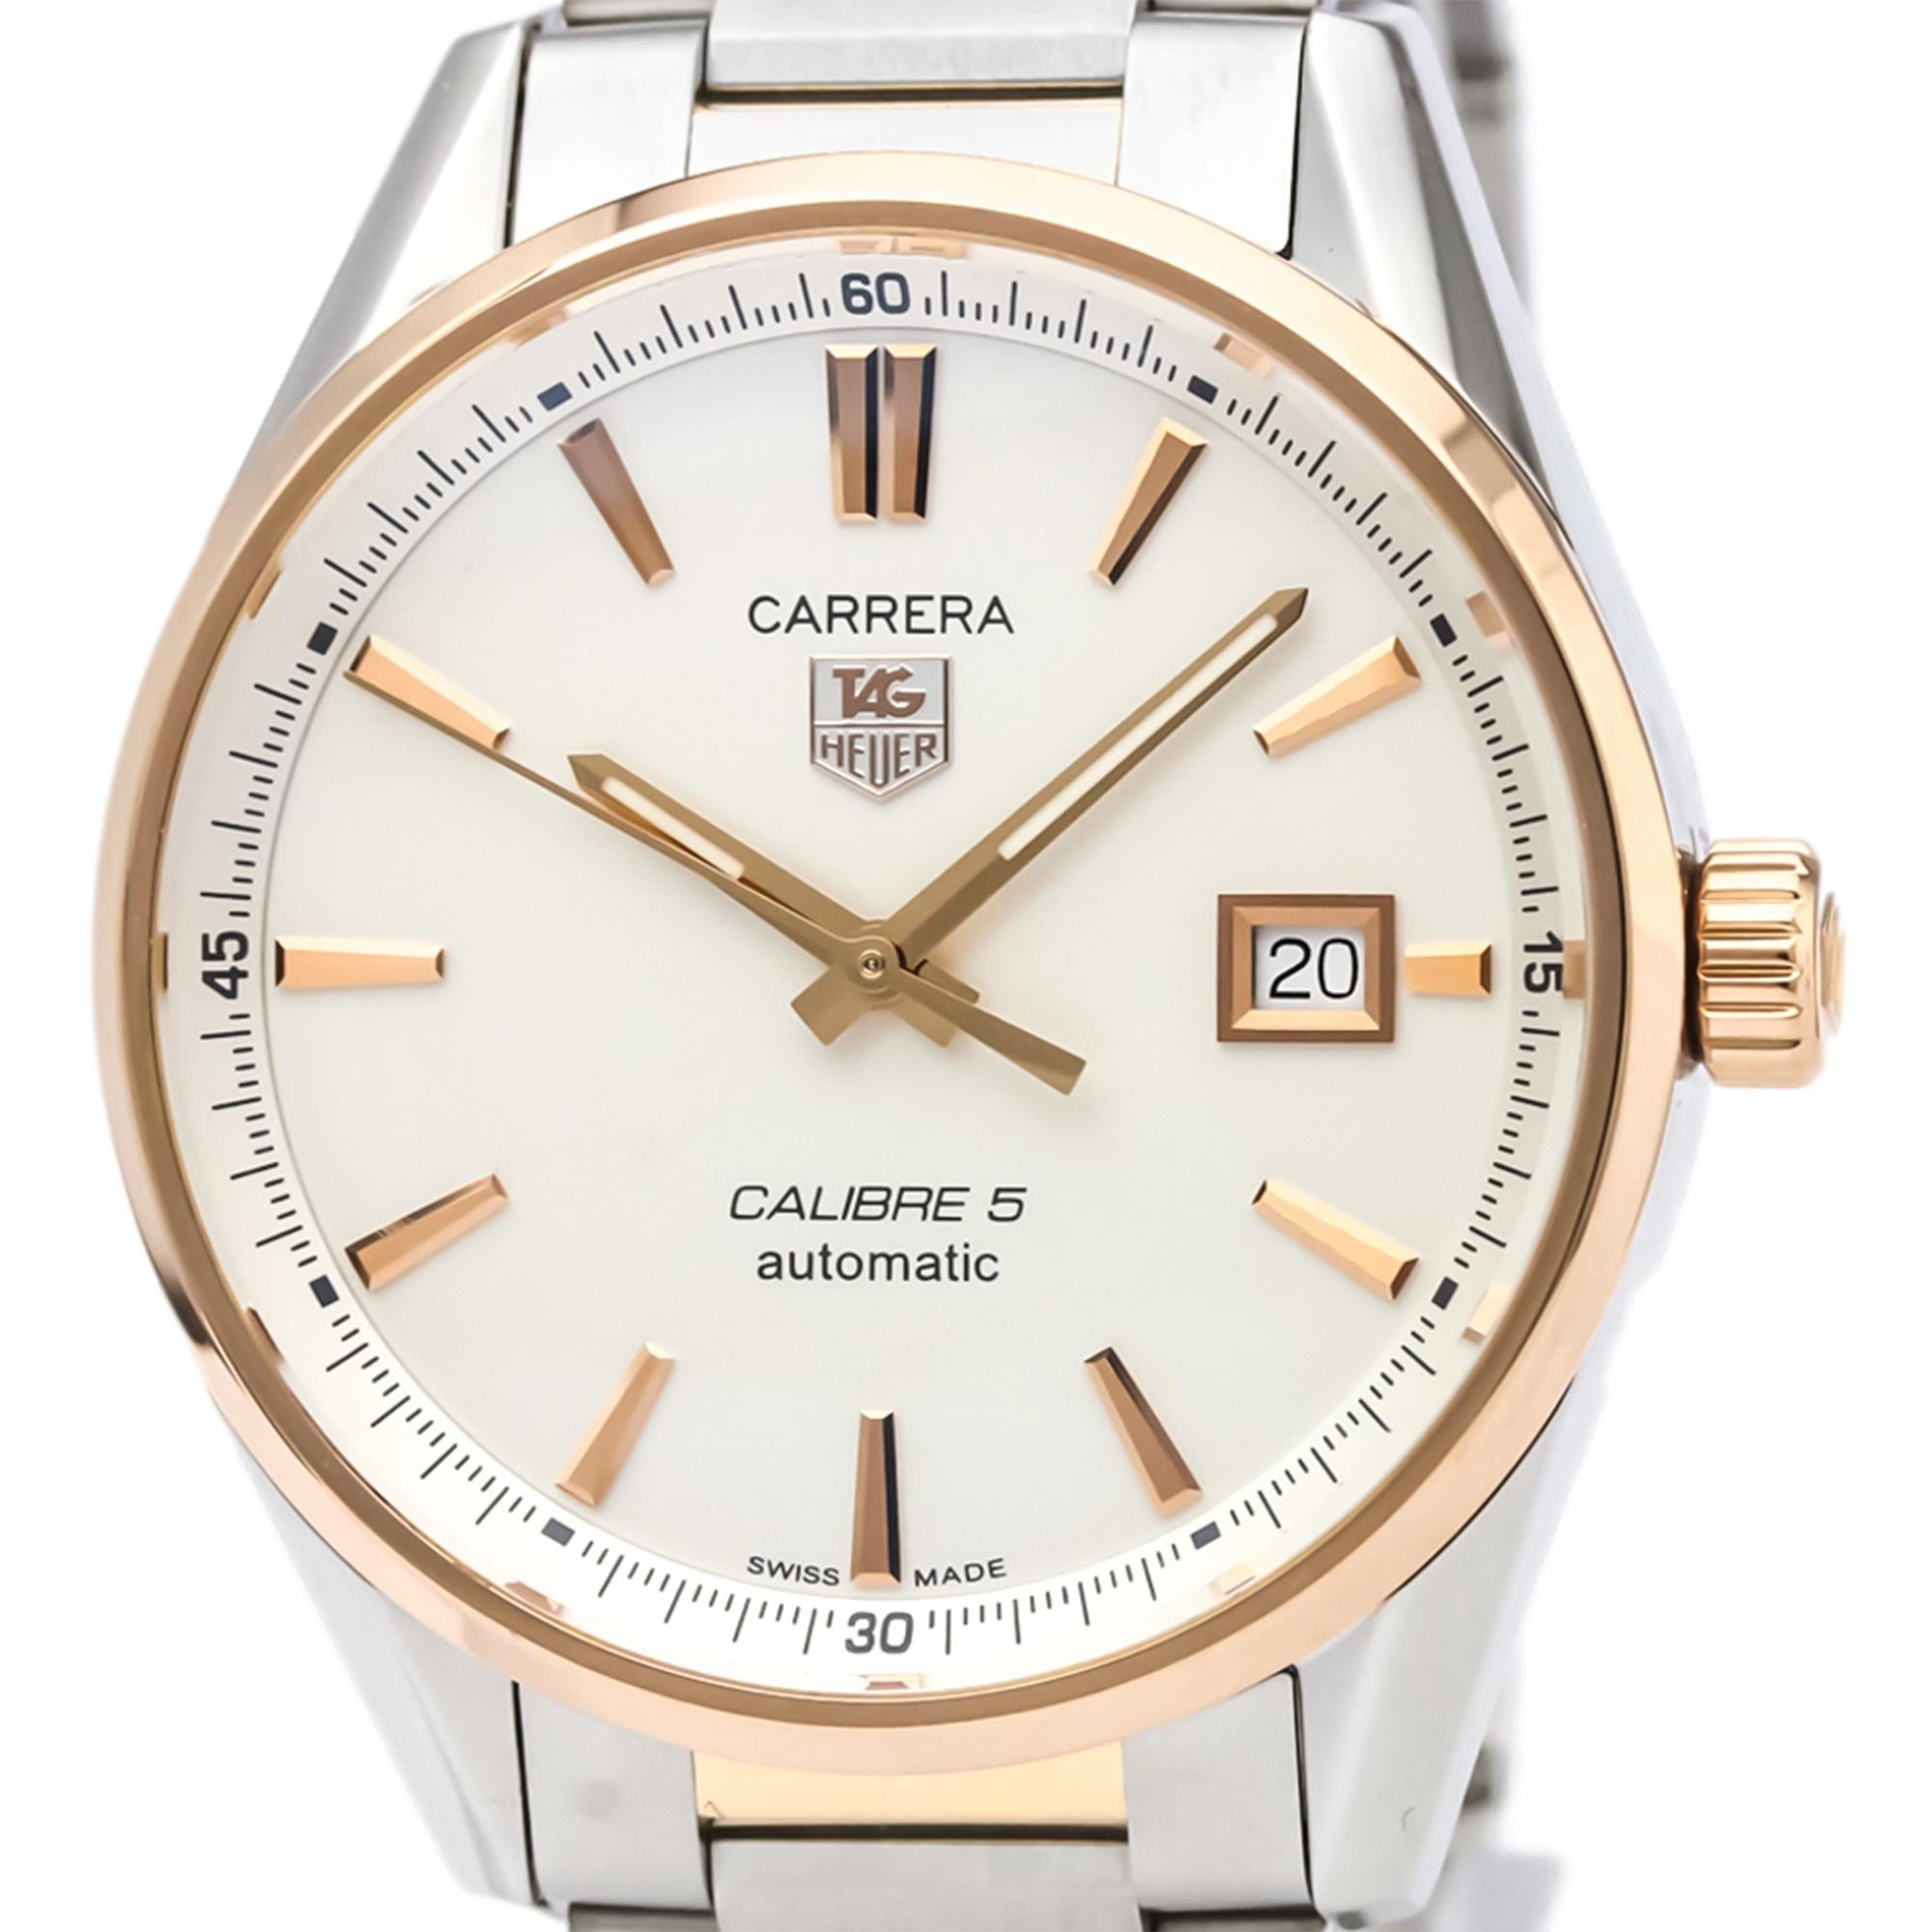 This watch features a stainless steel case with a gold bezel, a combination stainless steel and gold strap with a push button deployment clasp, and automatic movement. Watch Specifications: Face: about 3.6 cm × 3.6 cm Case: about 3.9 cm × 3.9 cm